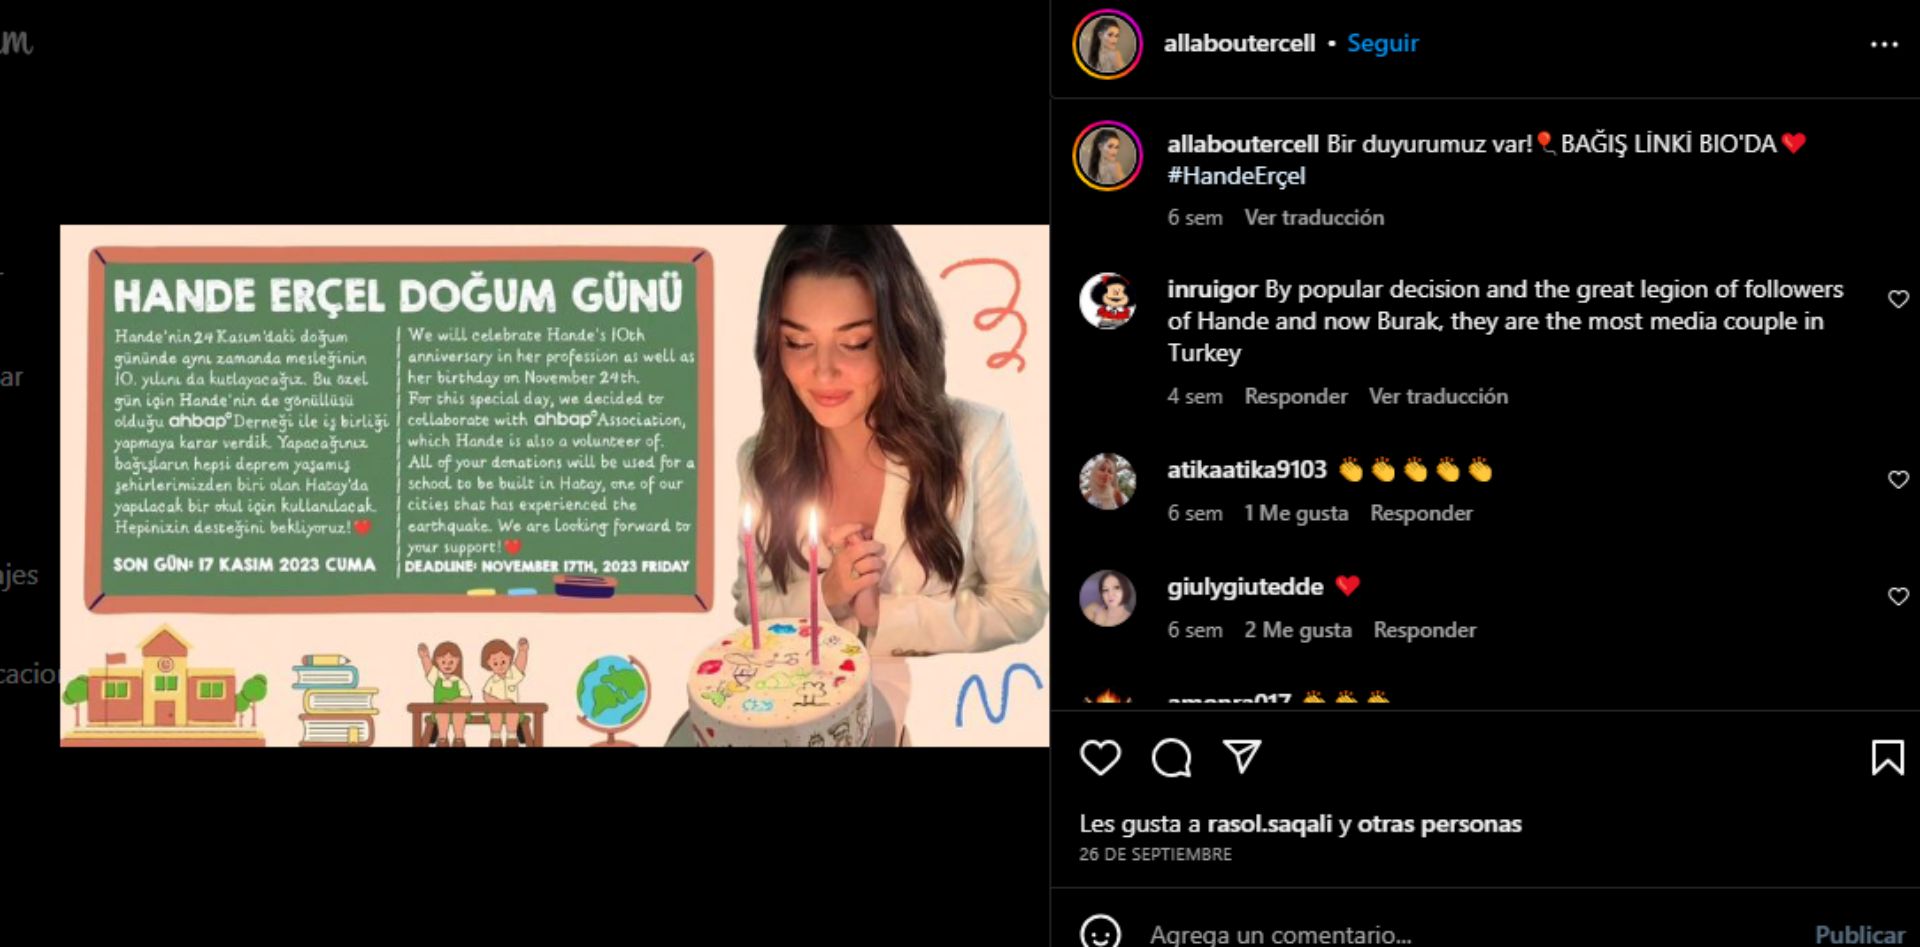 High move: Hande Erçel's birthday is coming up and his fans are organizing a global solidarity event